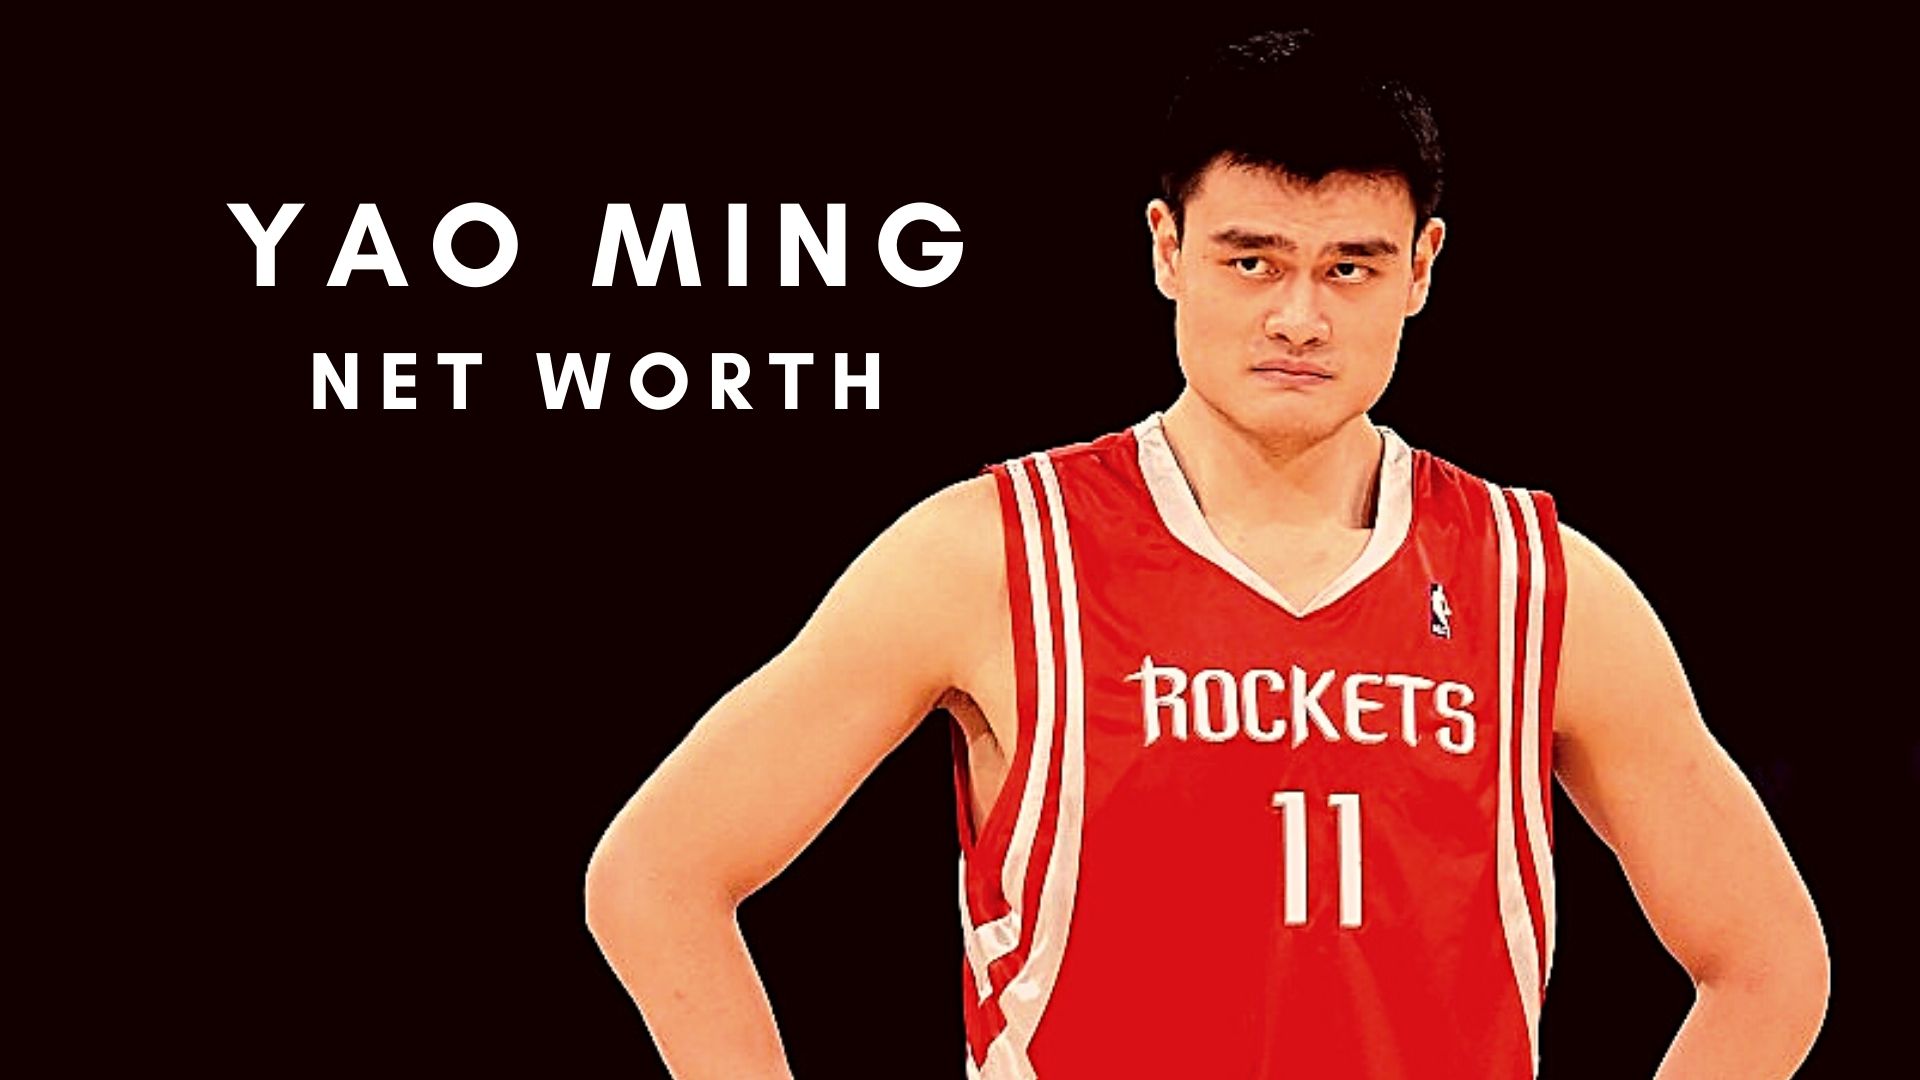 Yao Ming 2021 Net Worth, Salary, Records, and Endorsements